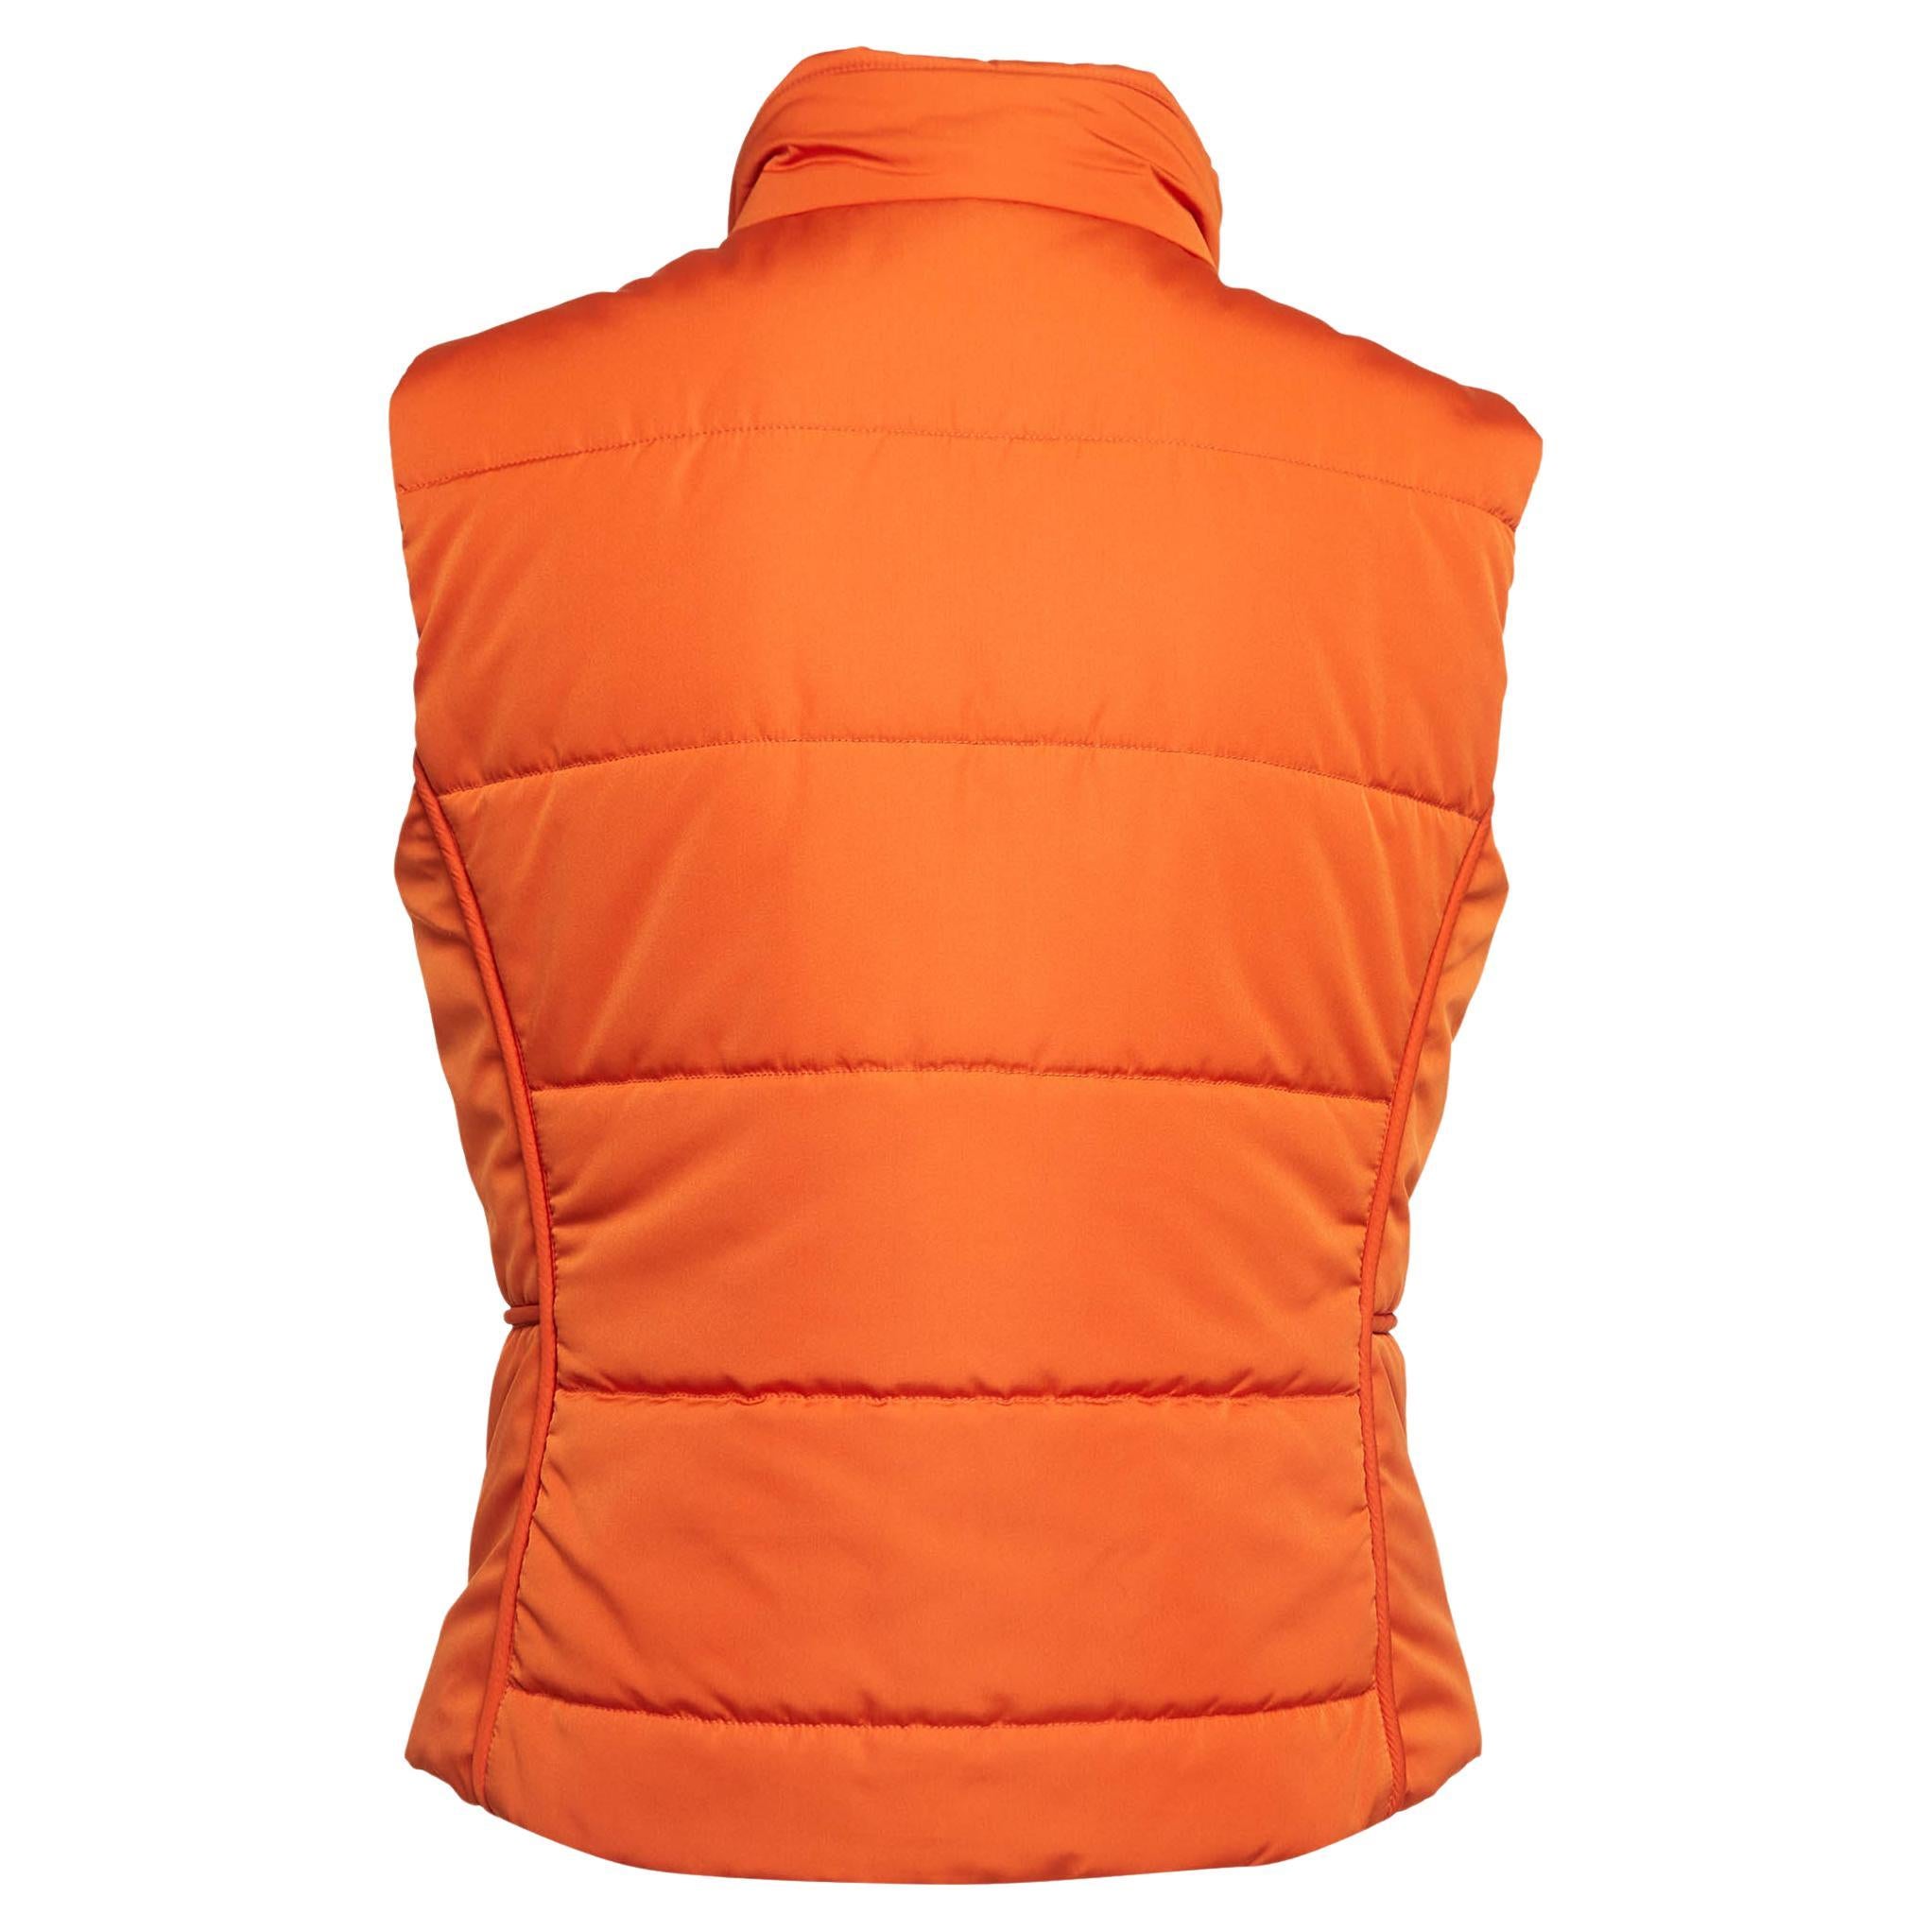 Wrap yourself in the refined luxury of the Hermès vest. Crafted with precision and finesse, this vest boasts a sleek silhouette and quilted design. Its vibrant orange hue adds a pop of color to any ensemble, while the sleeveless cut offers